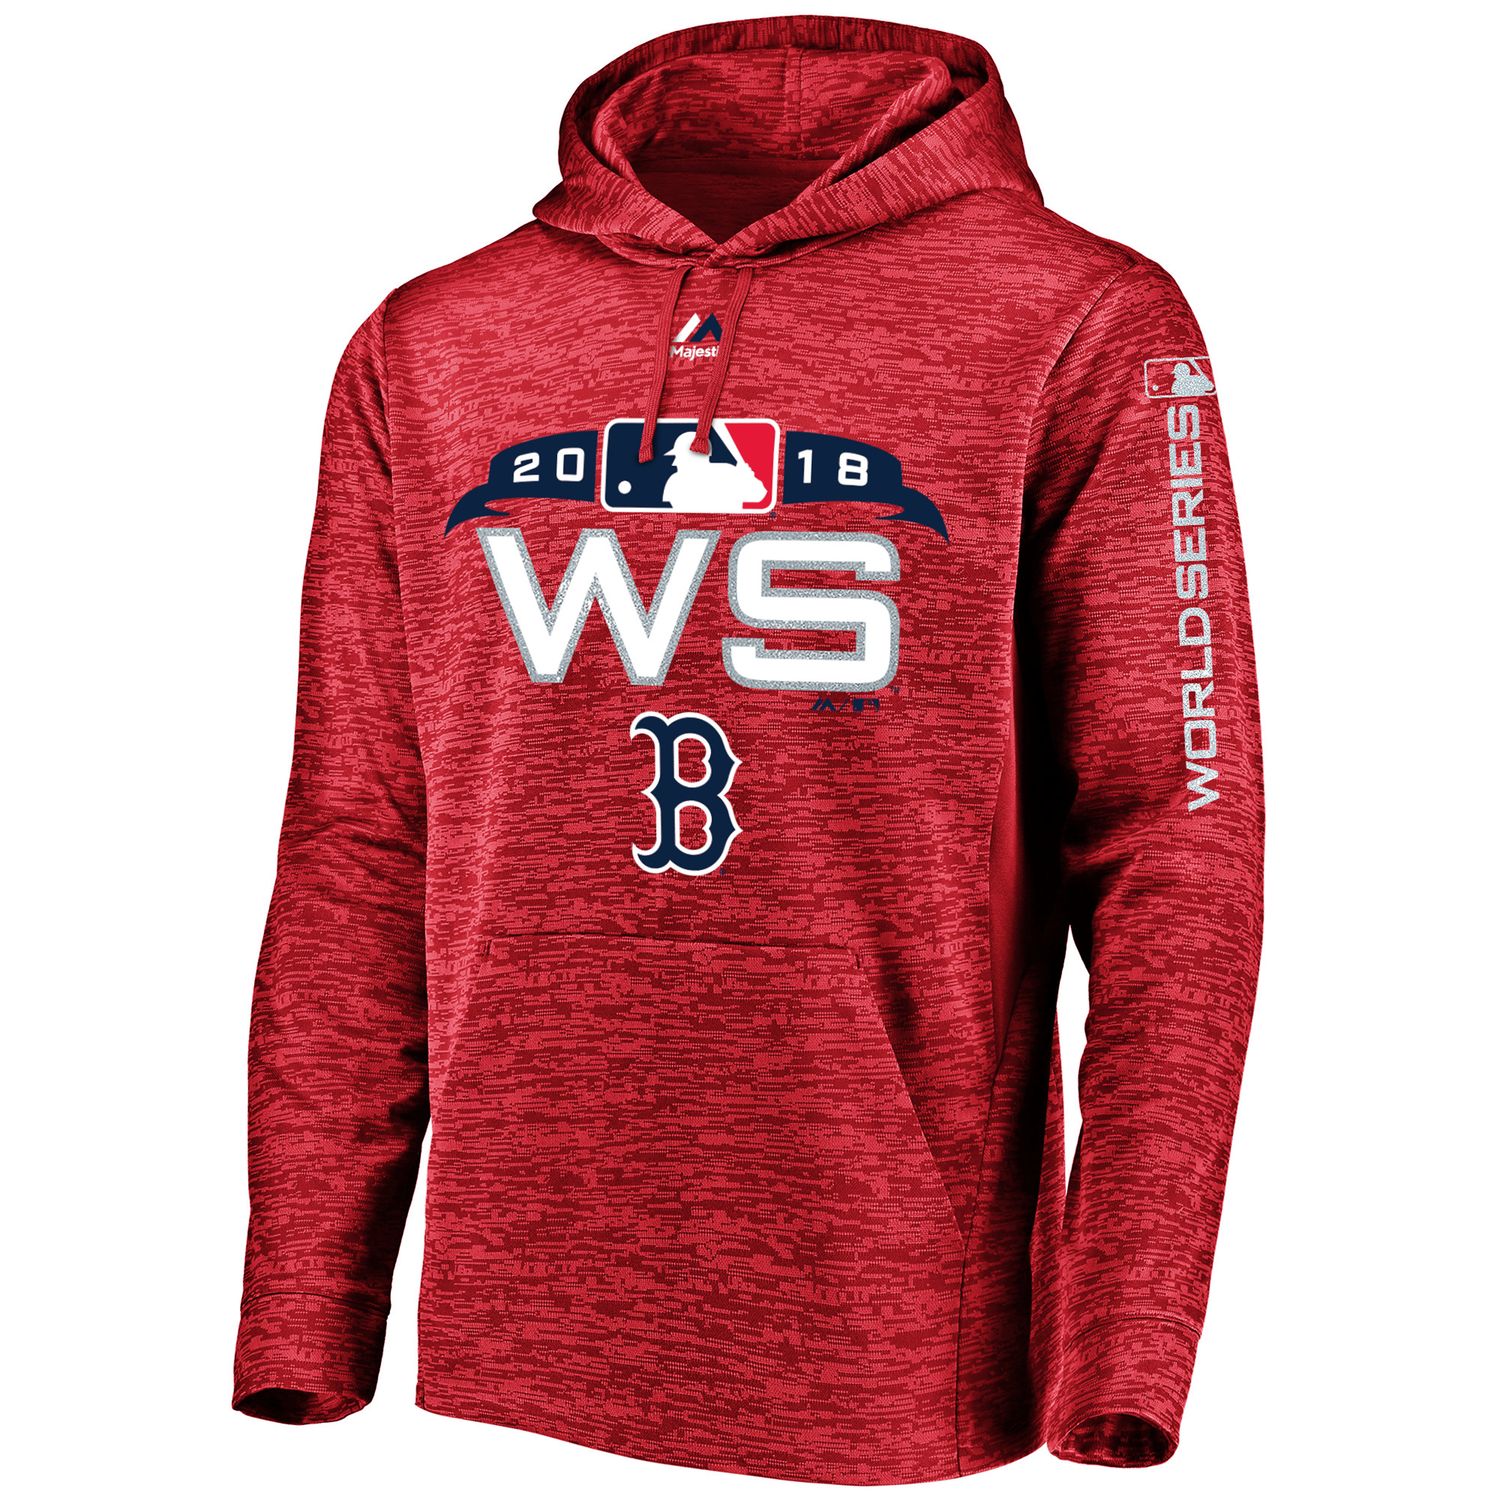 red sox 2018 world series jersey